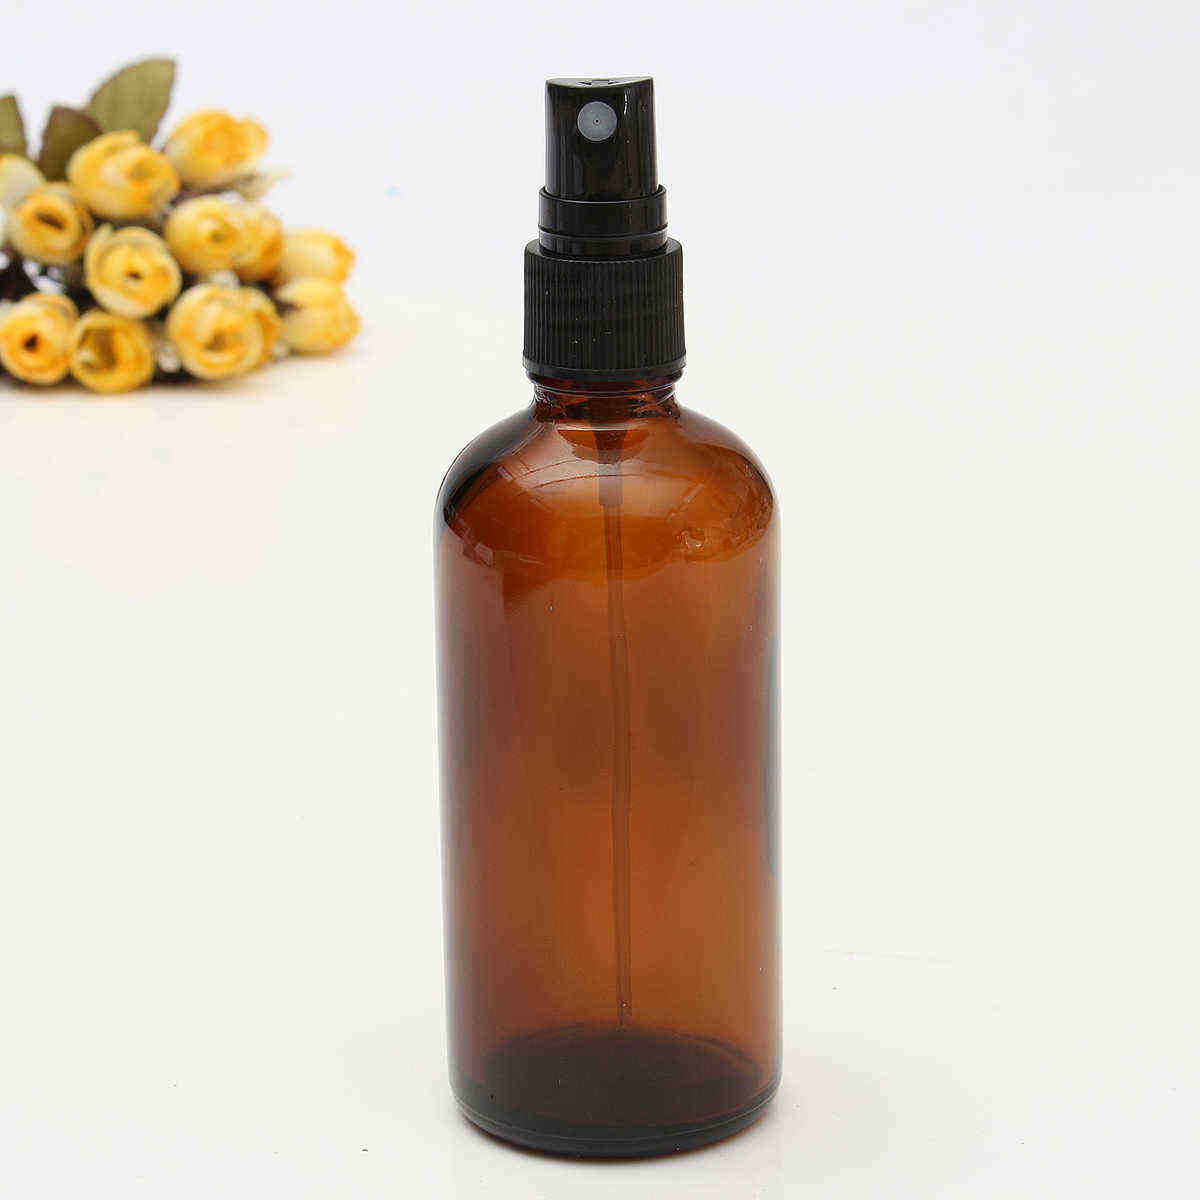 100ml-Refillable-Glass-Spray-Bottle-Atomizer-Liquid-Container-Travel-Makeup-Sample-Lotion-1143199